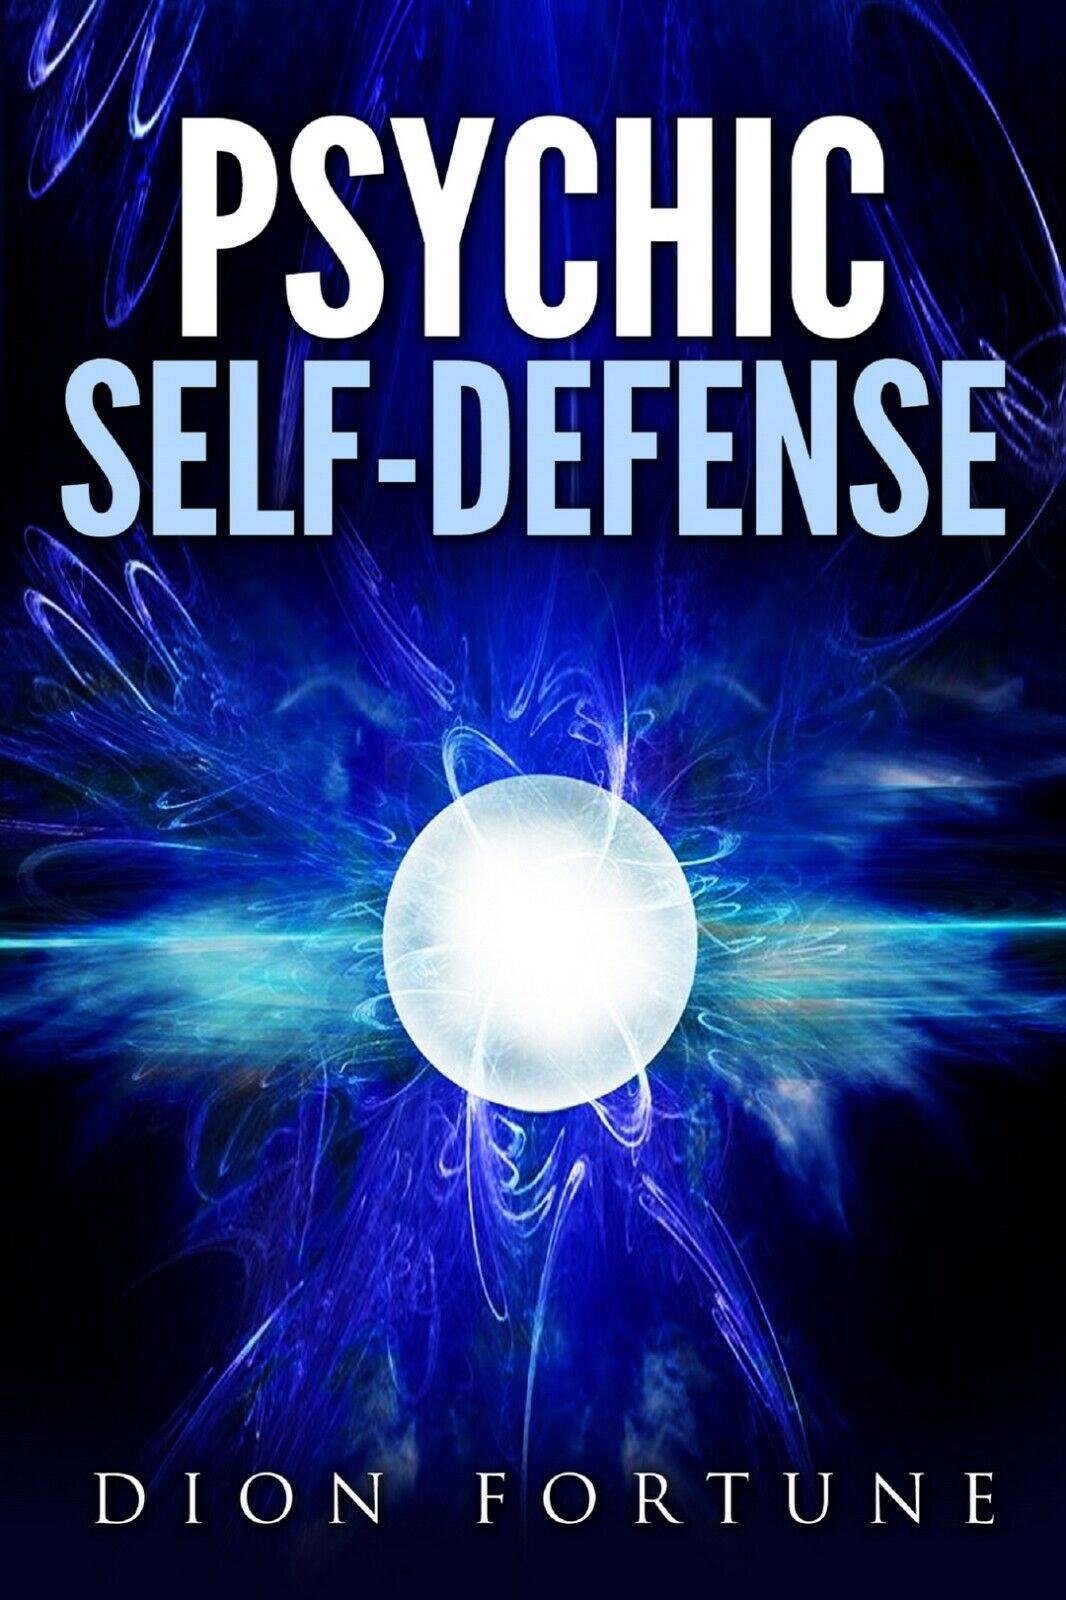 Psychic self-defense: The Classic Instruction Manual for Protecting Yourself libro usato